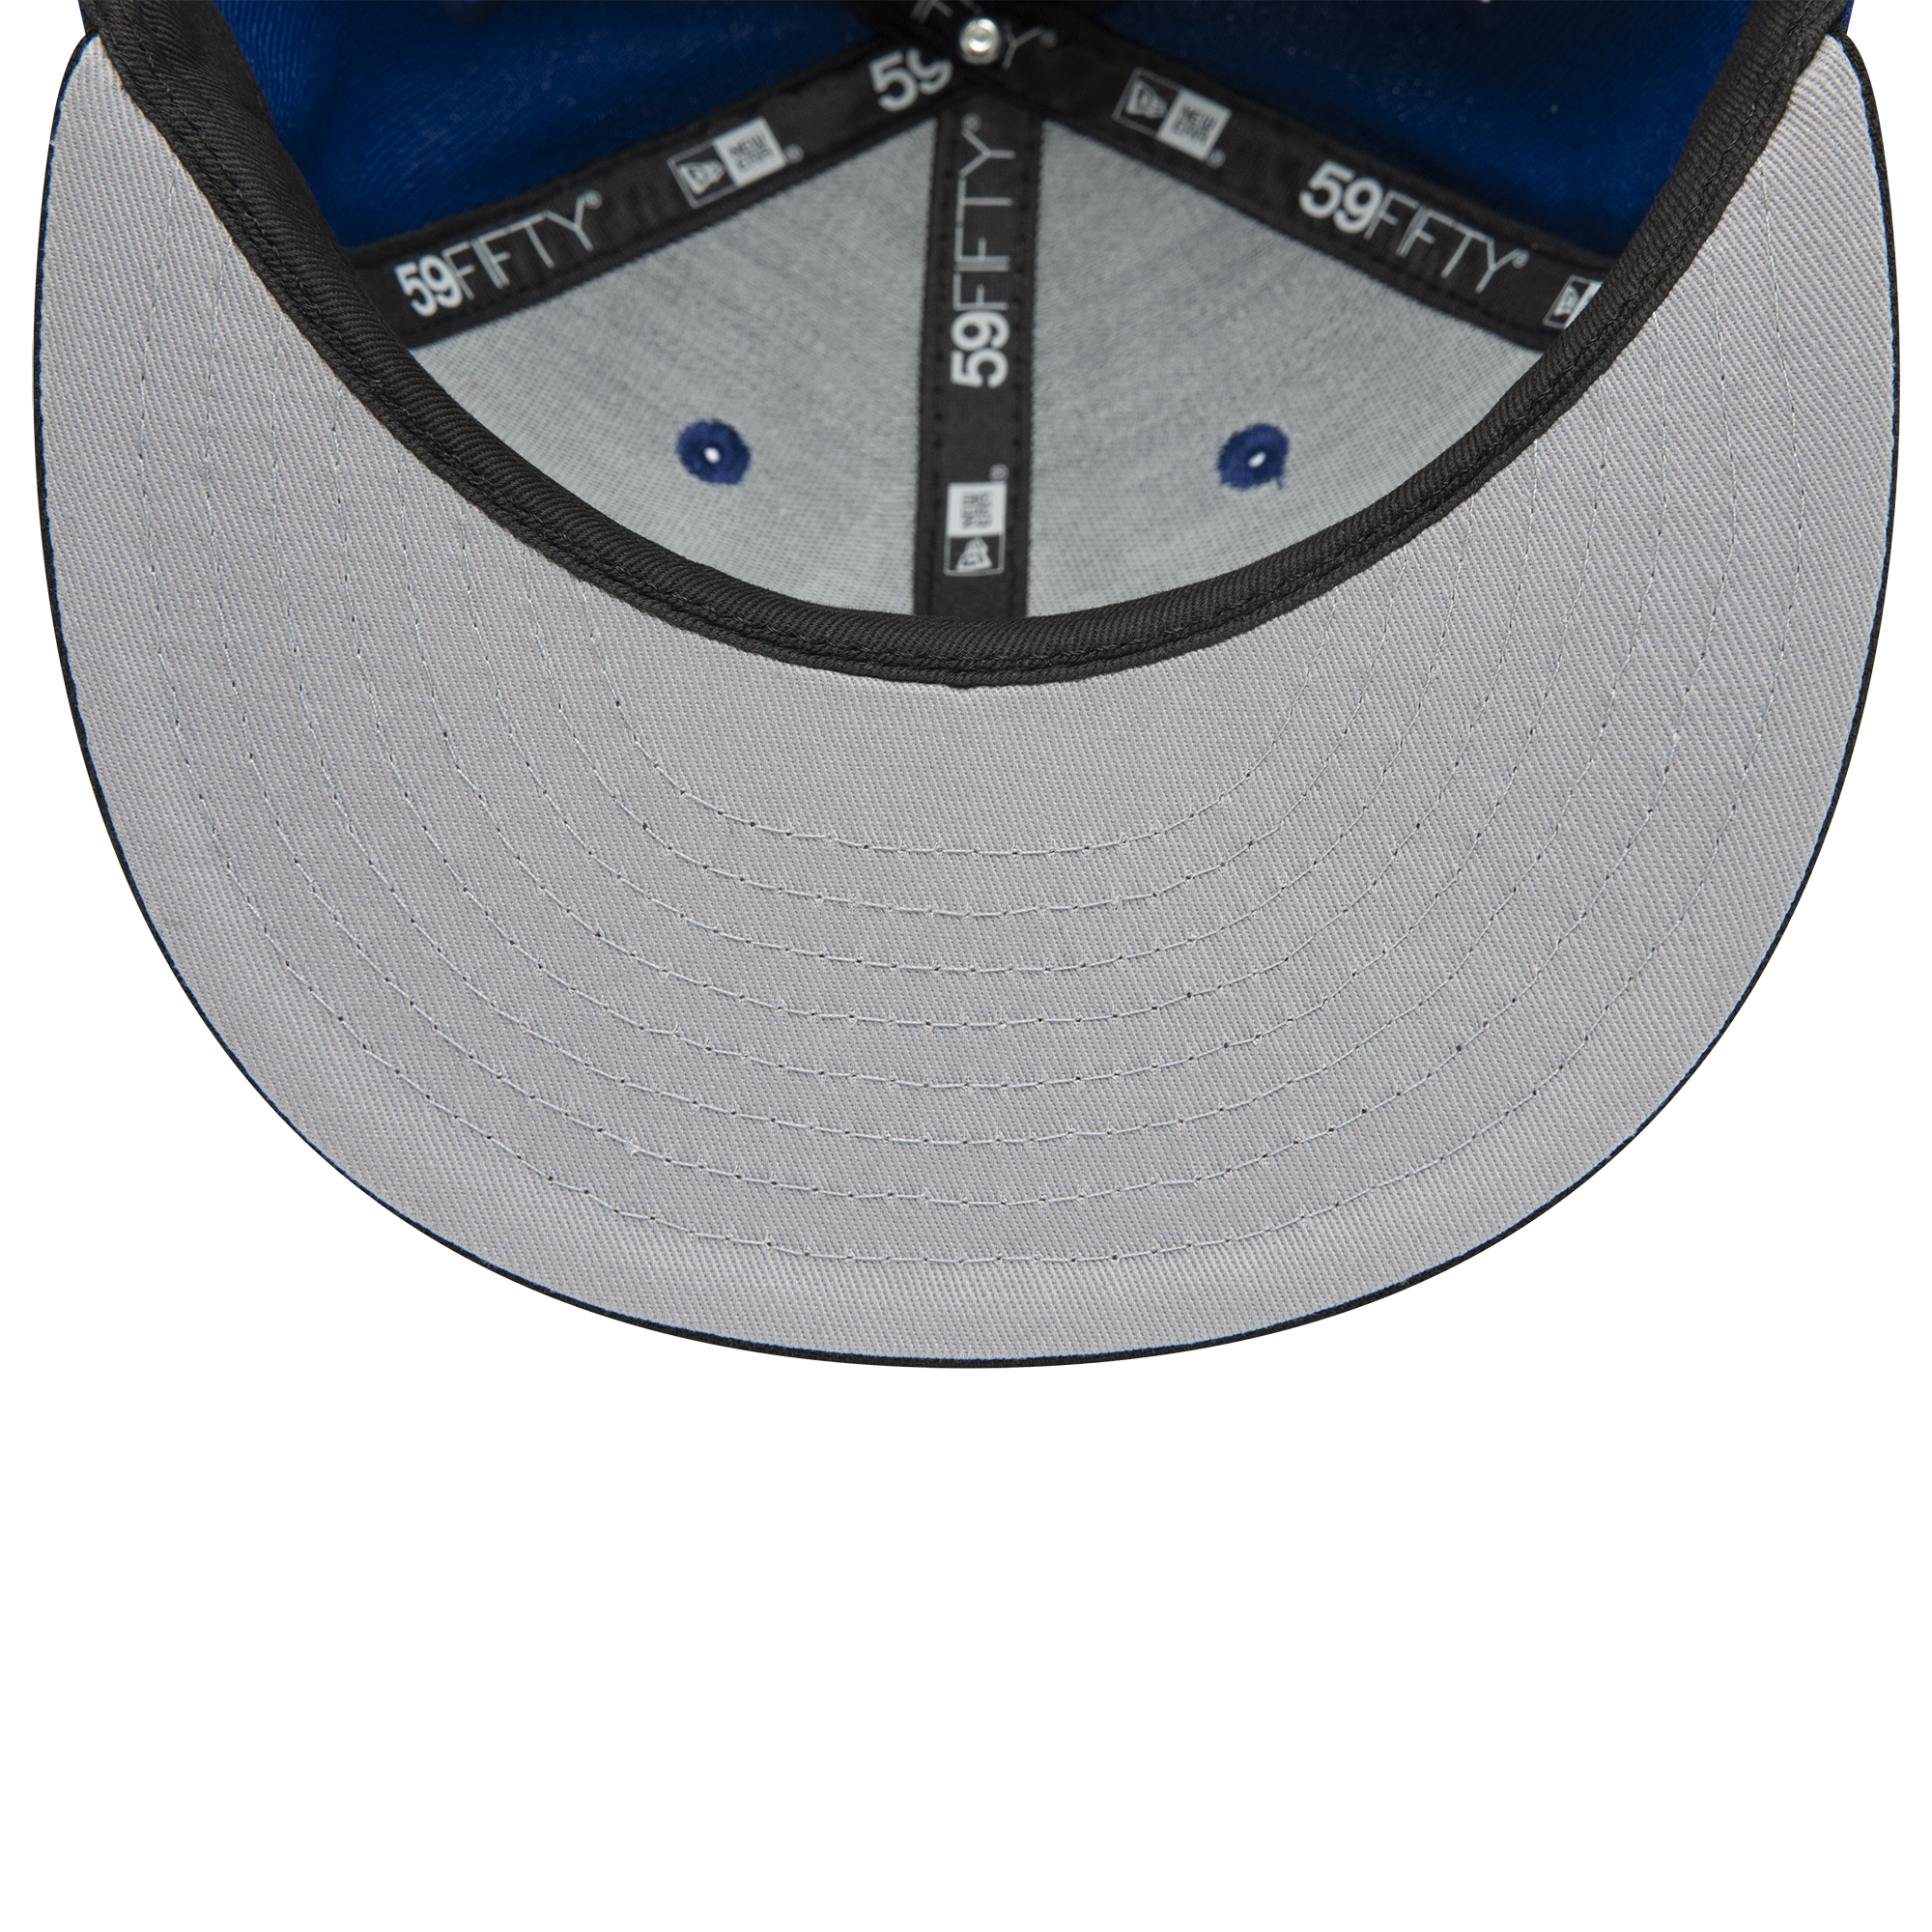 New York Mets MLB Blues Blue 59FIFTY Fitted Cap